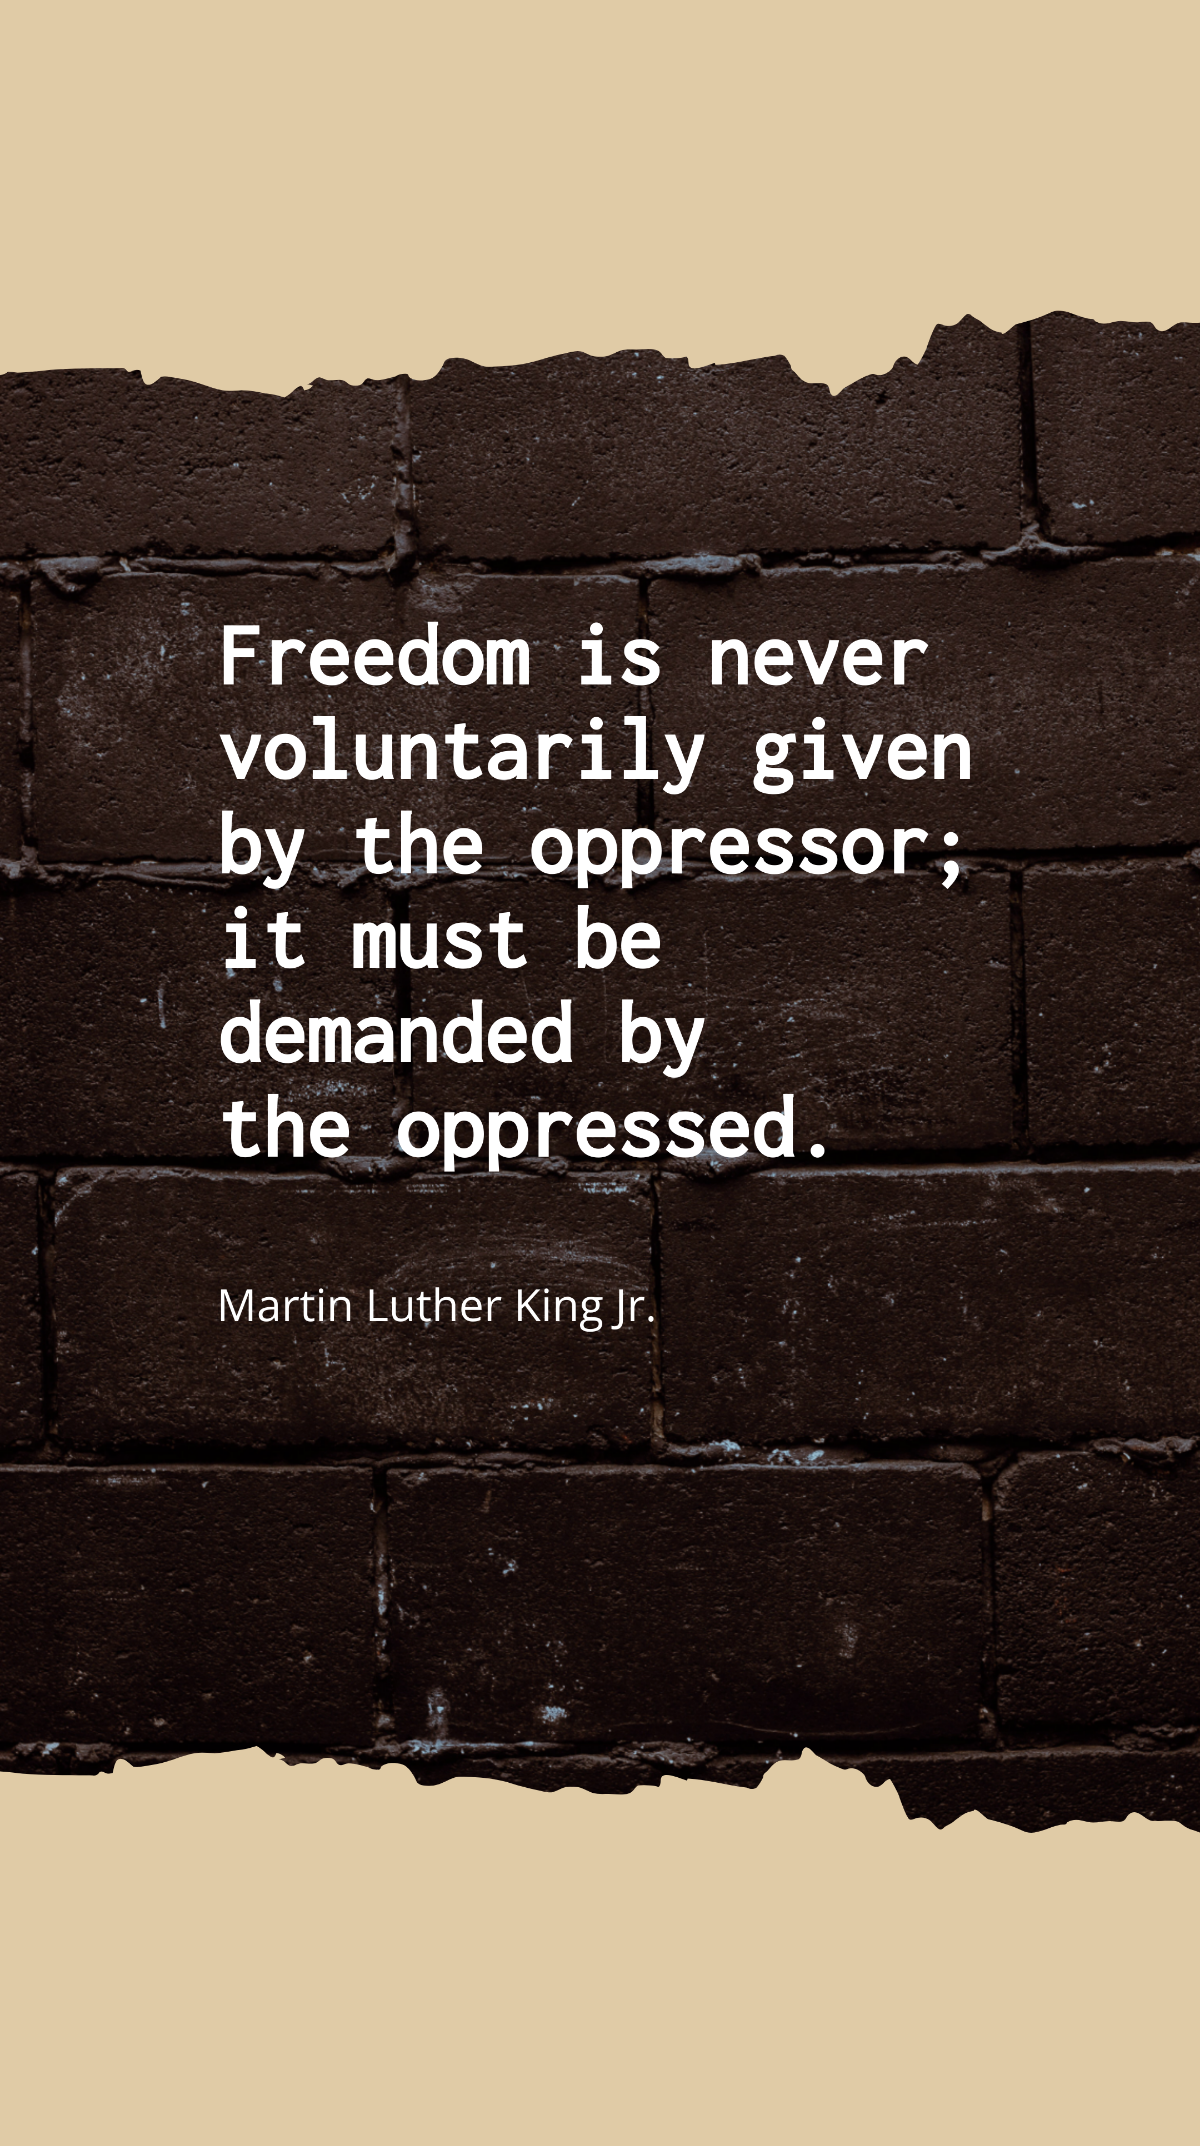 Martin Luther King Jr. - Freedom is never voluntarily given by the oppressor; it must be demanded by the oppressed. Template